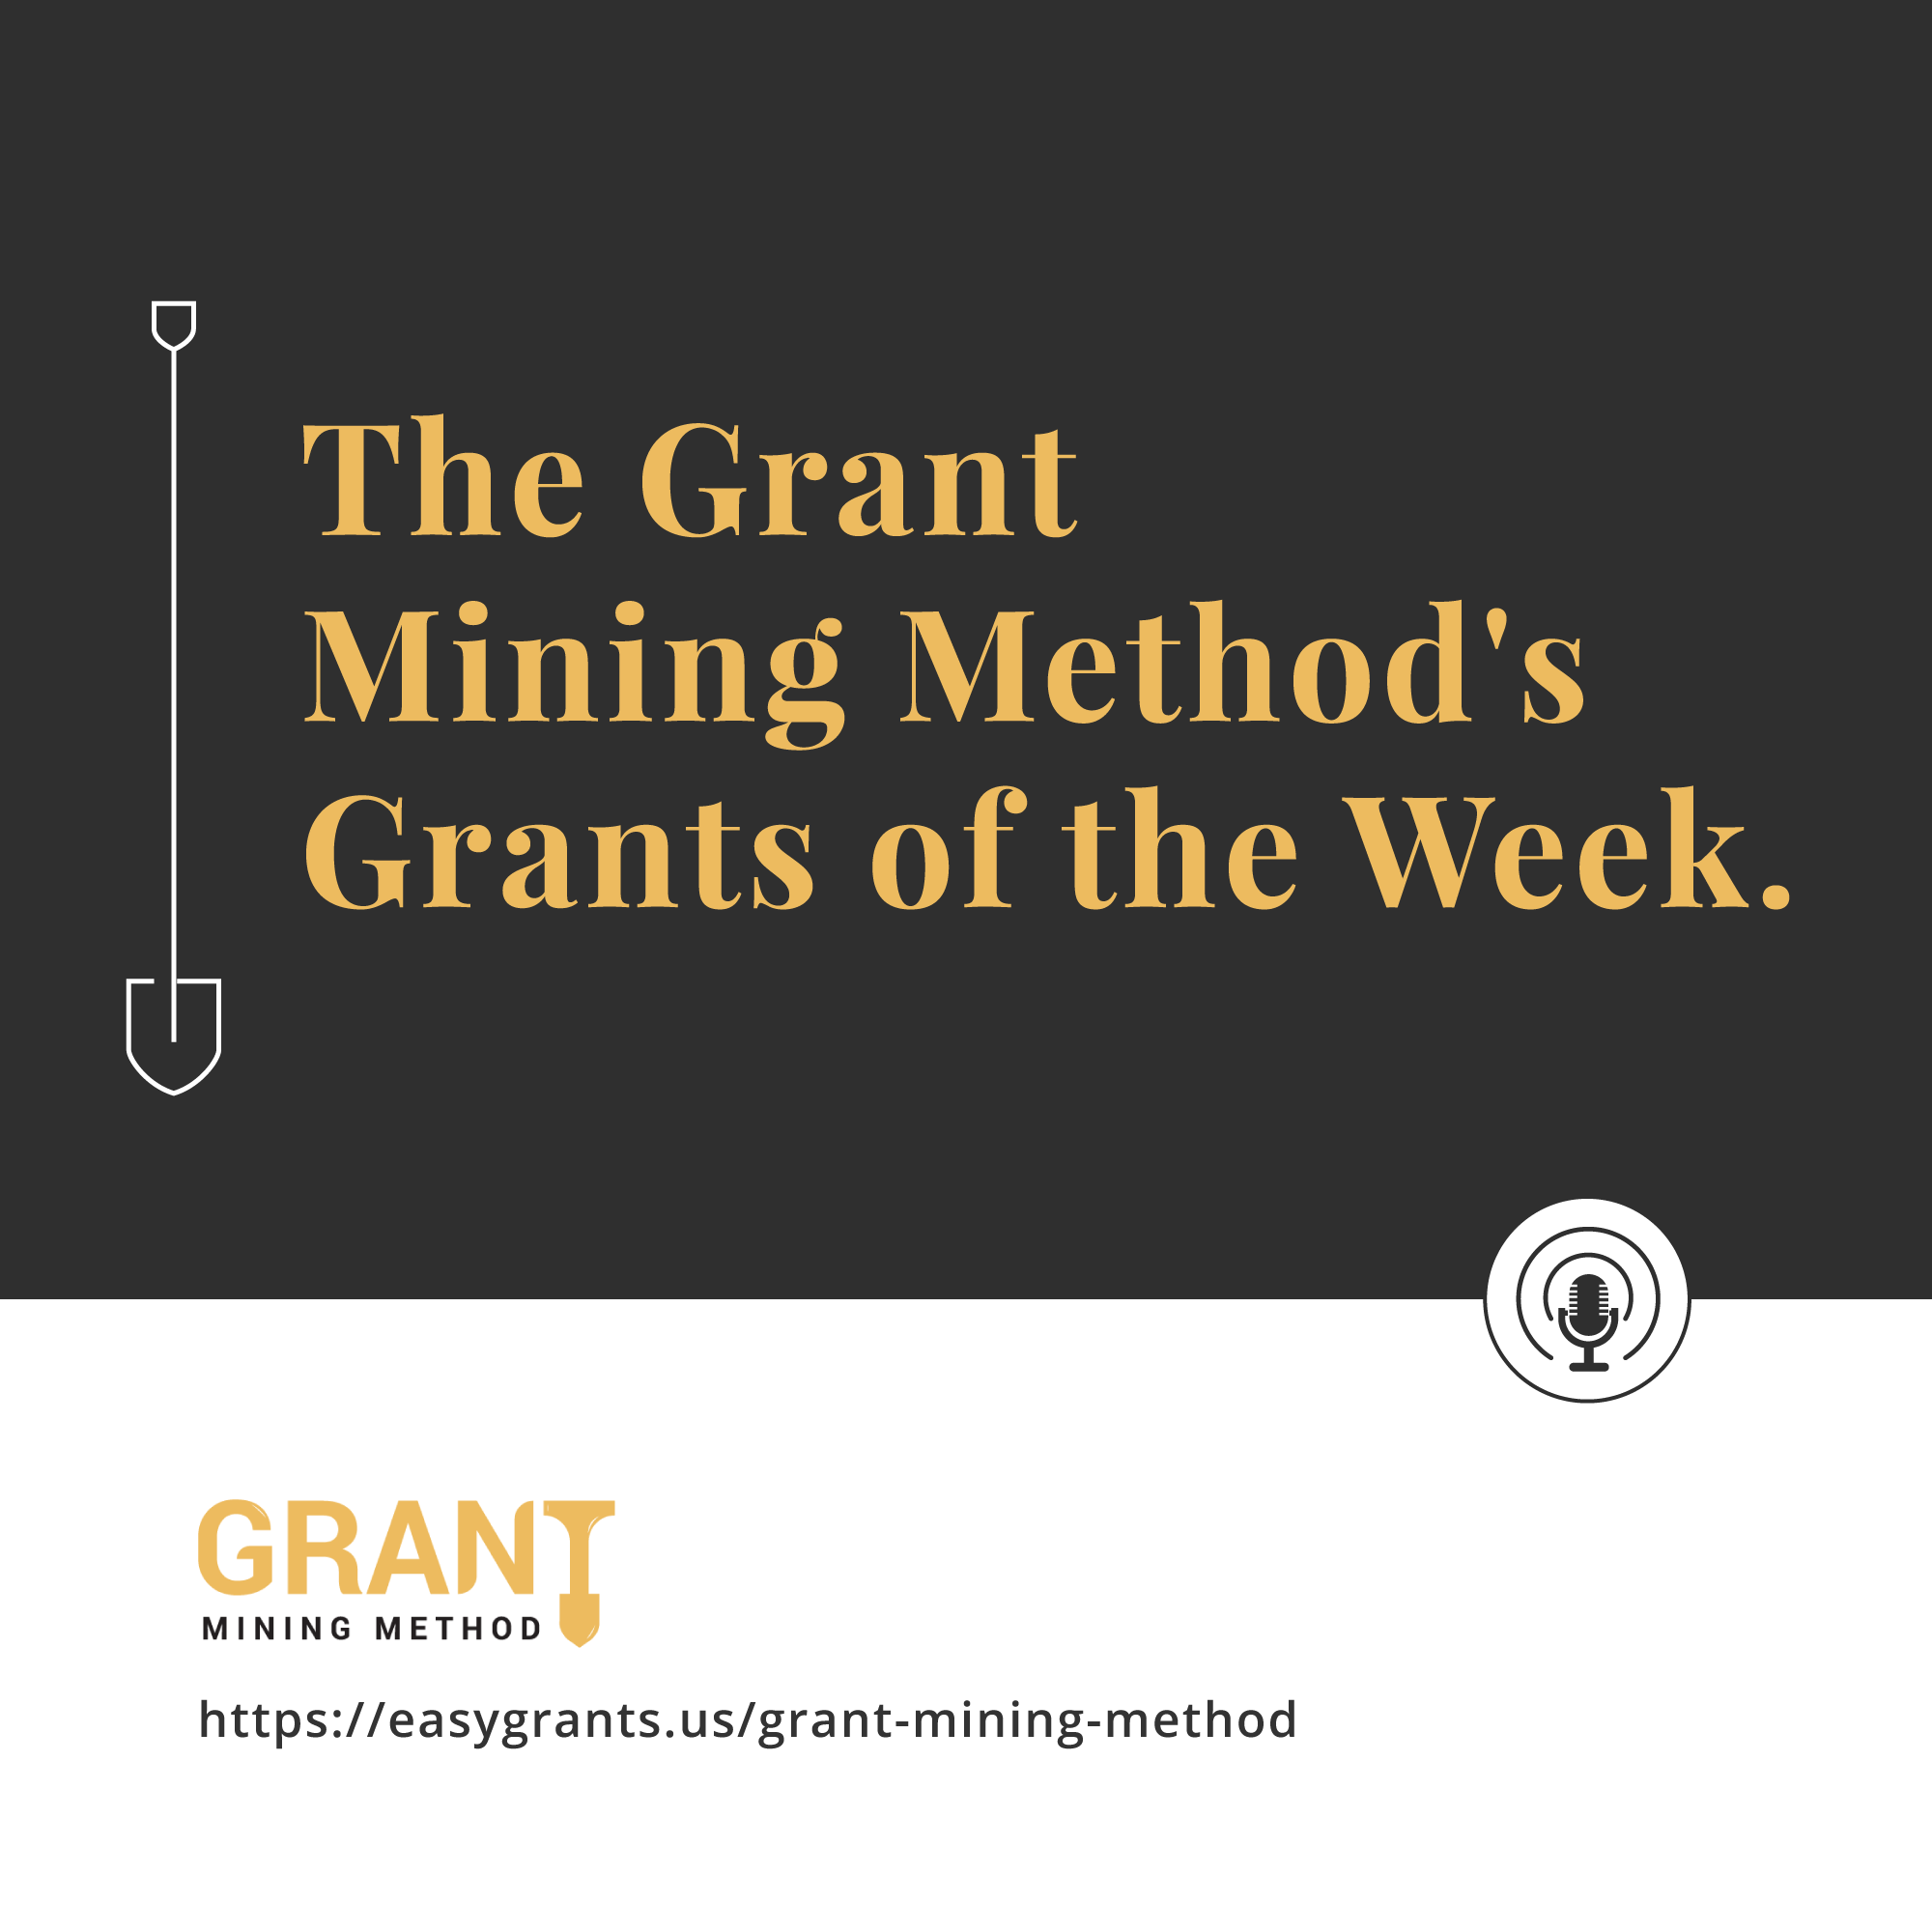 Artwork for The Grant Mining Method's Grants of the Week